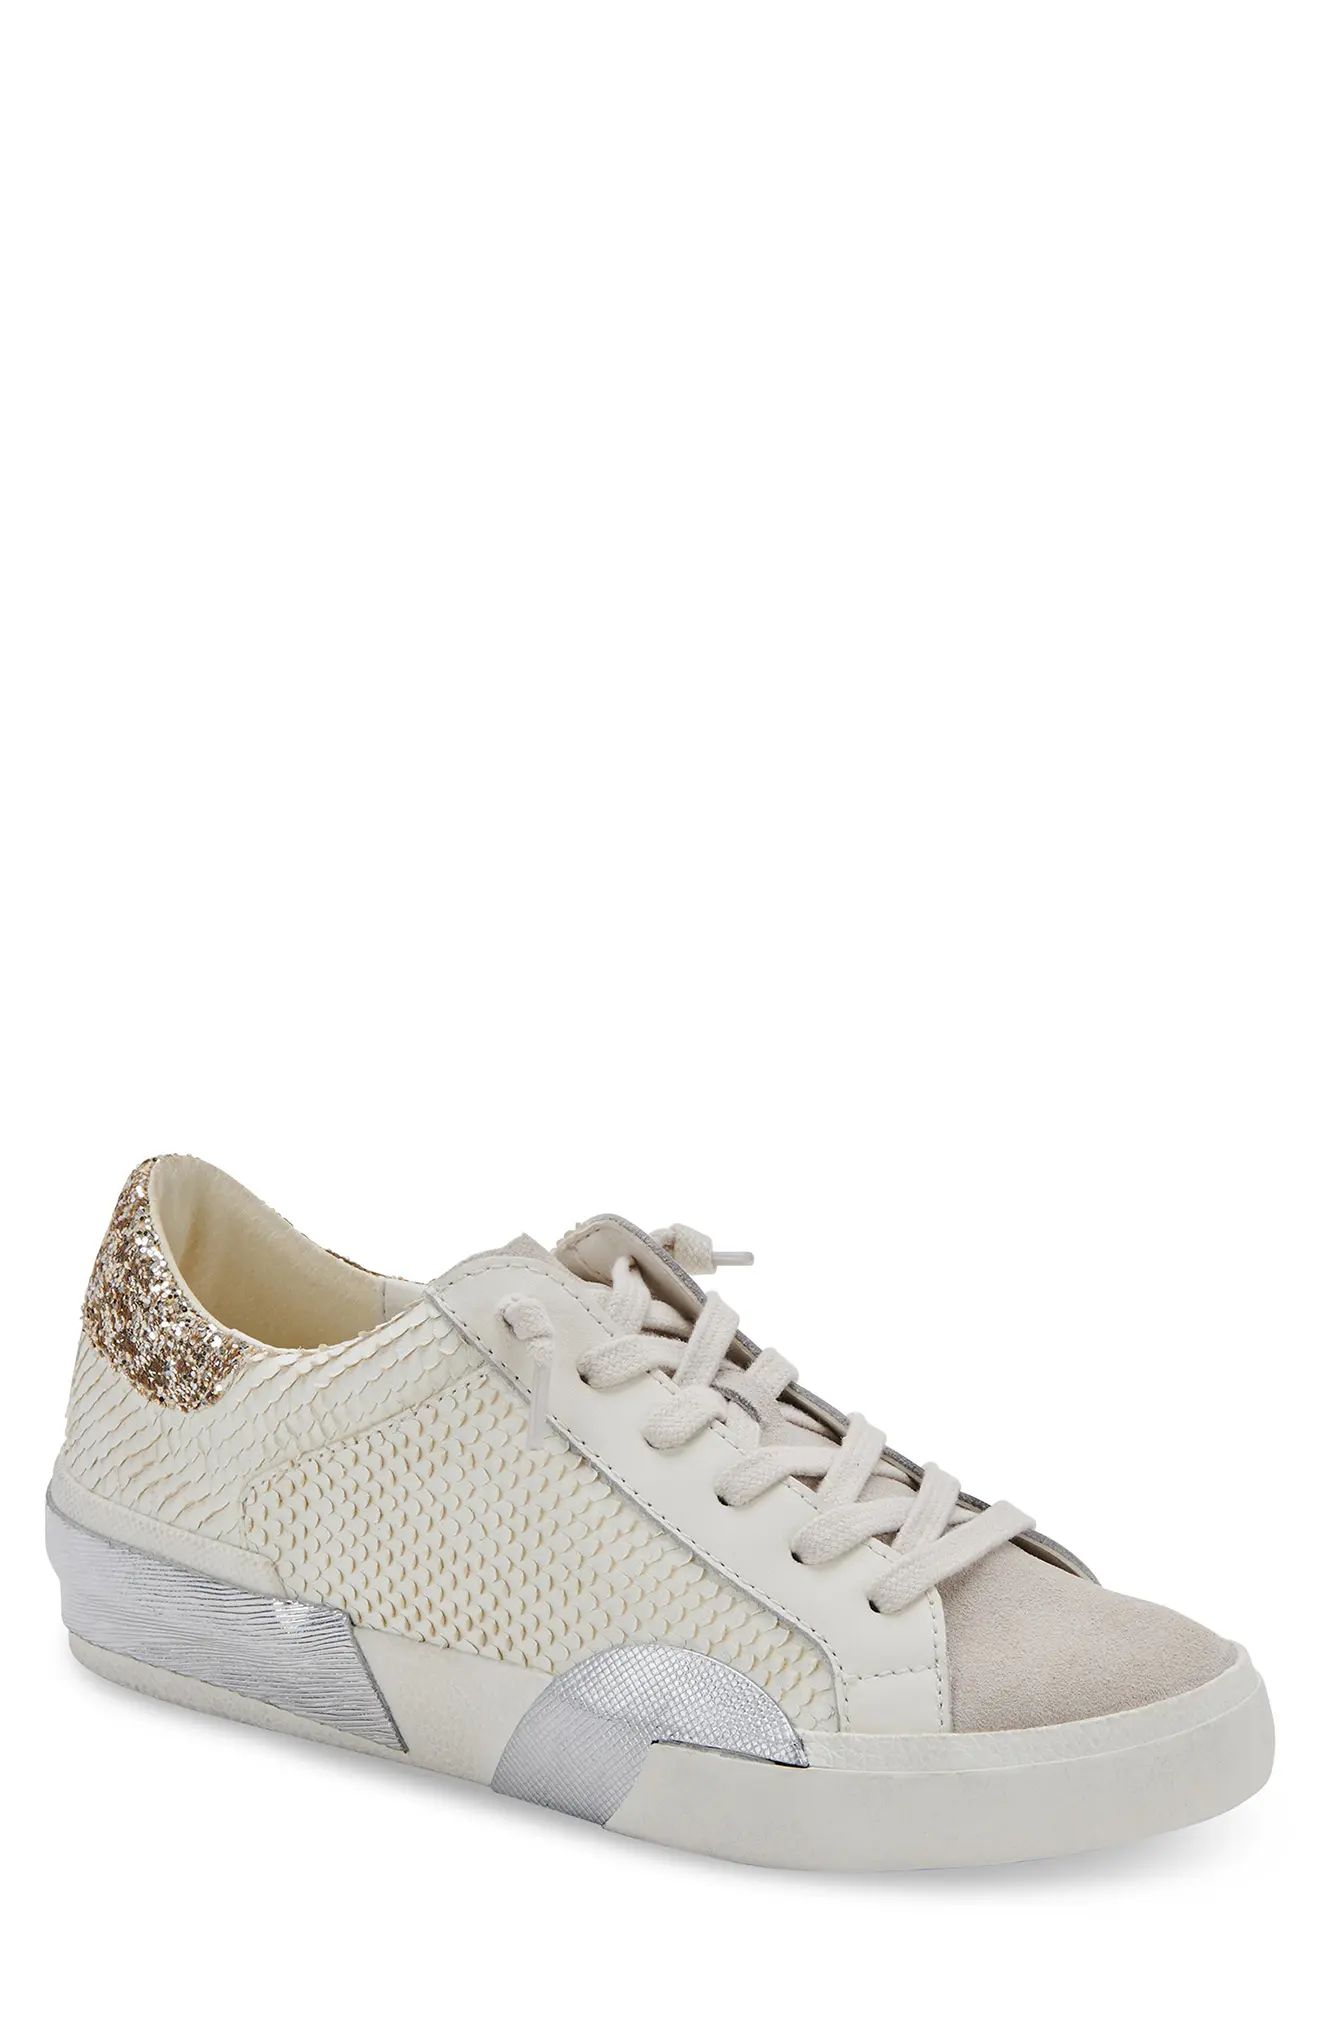 Dolce Vita Zina Sneaker in Off White Embossed Leather at Nordstrom, Size 8 | Nordstrom